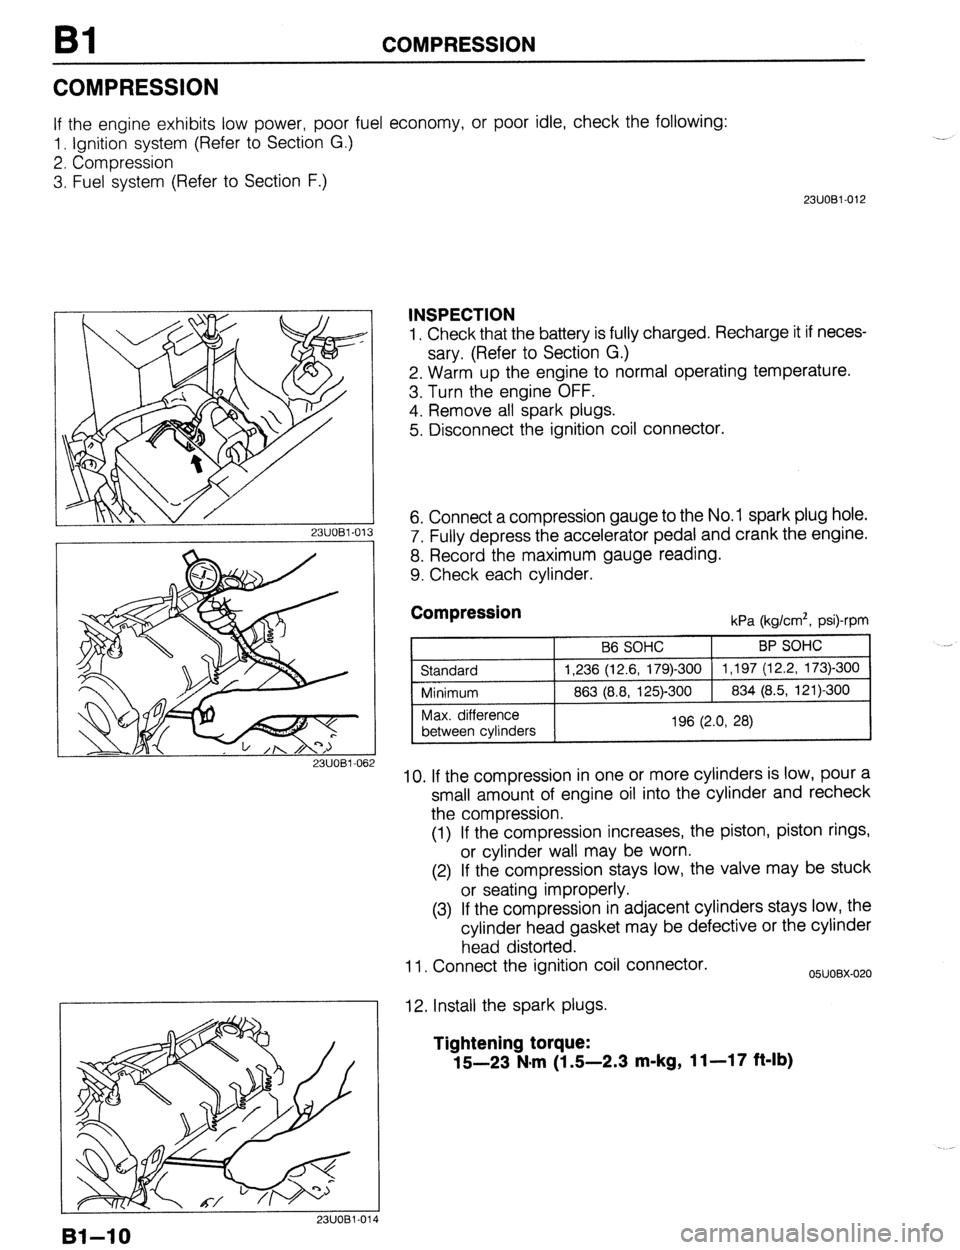 MAZDA PROTEGE 1992  Workshop Manual Bl COMPRESSION 
COMPRESSION 
If the engine exhibits low power, poor fuel economy, or poor idle, check the following: 
1. Ignition system (Refer to Section G.) 
2. Compression 
3. Fuel system (Refer to